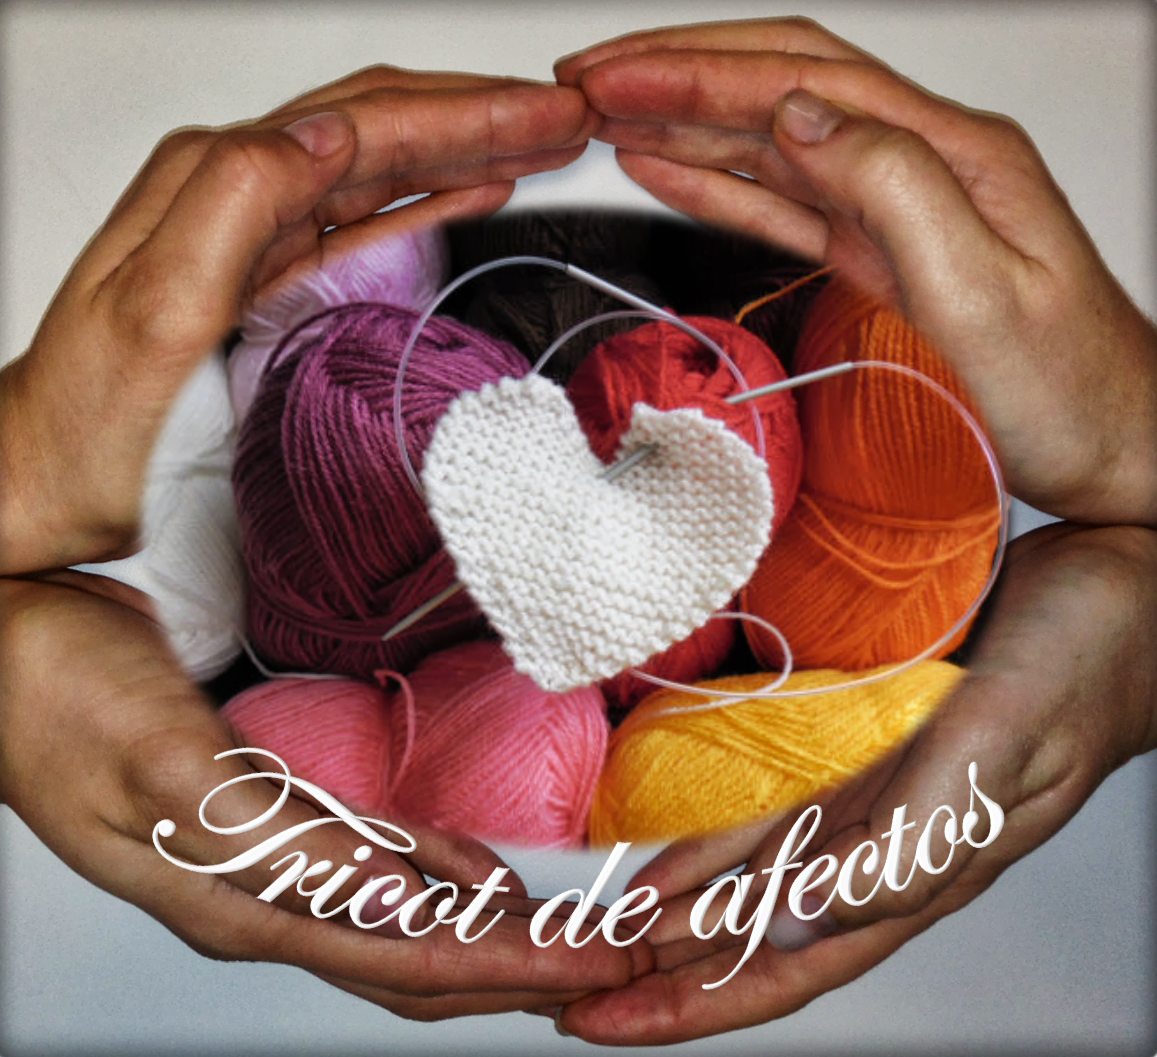 Tricot de Afectos  /  Knitted Affections